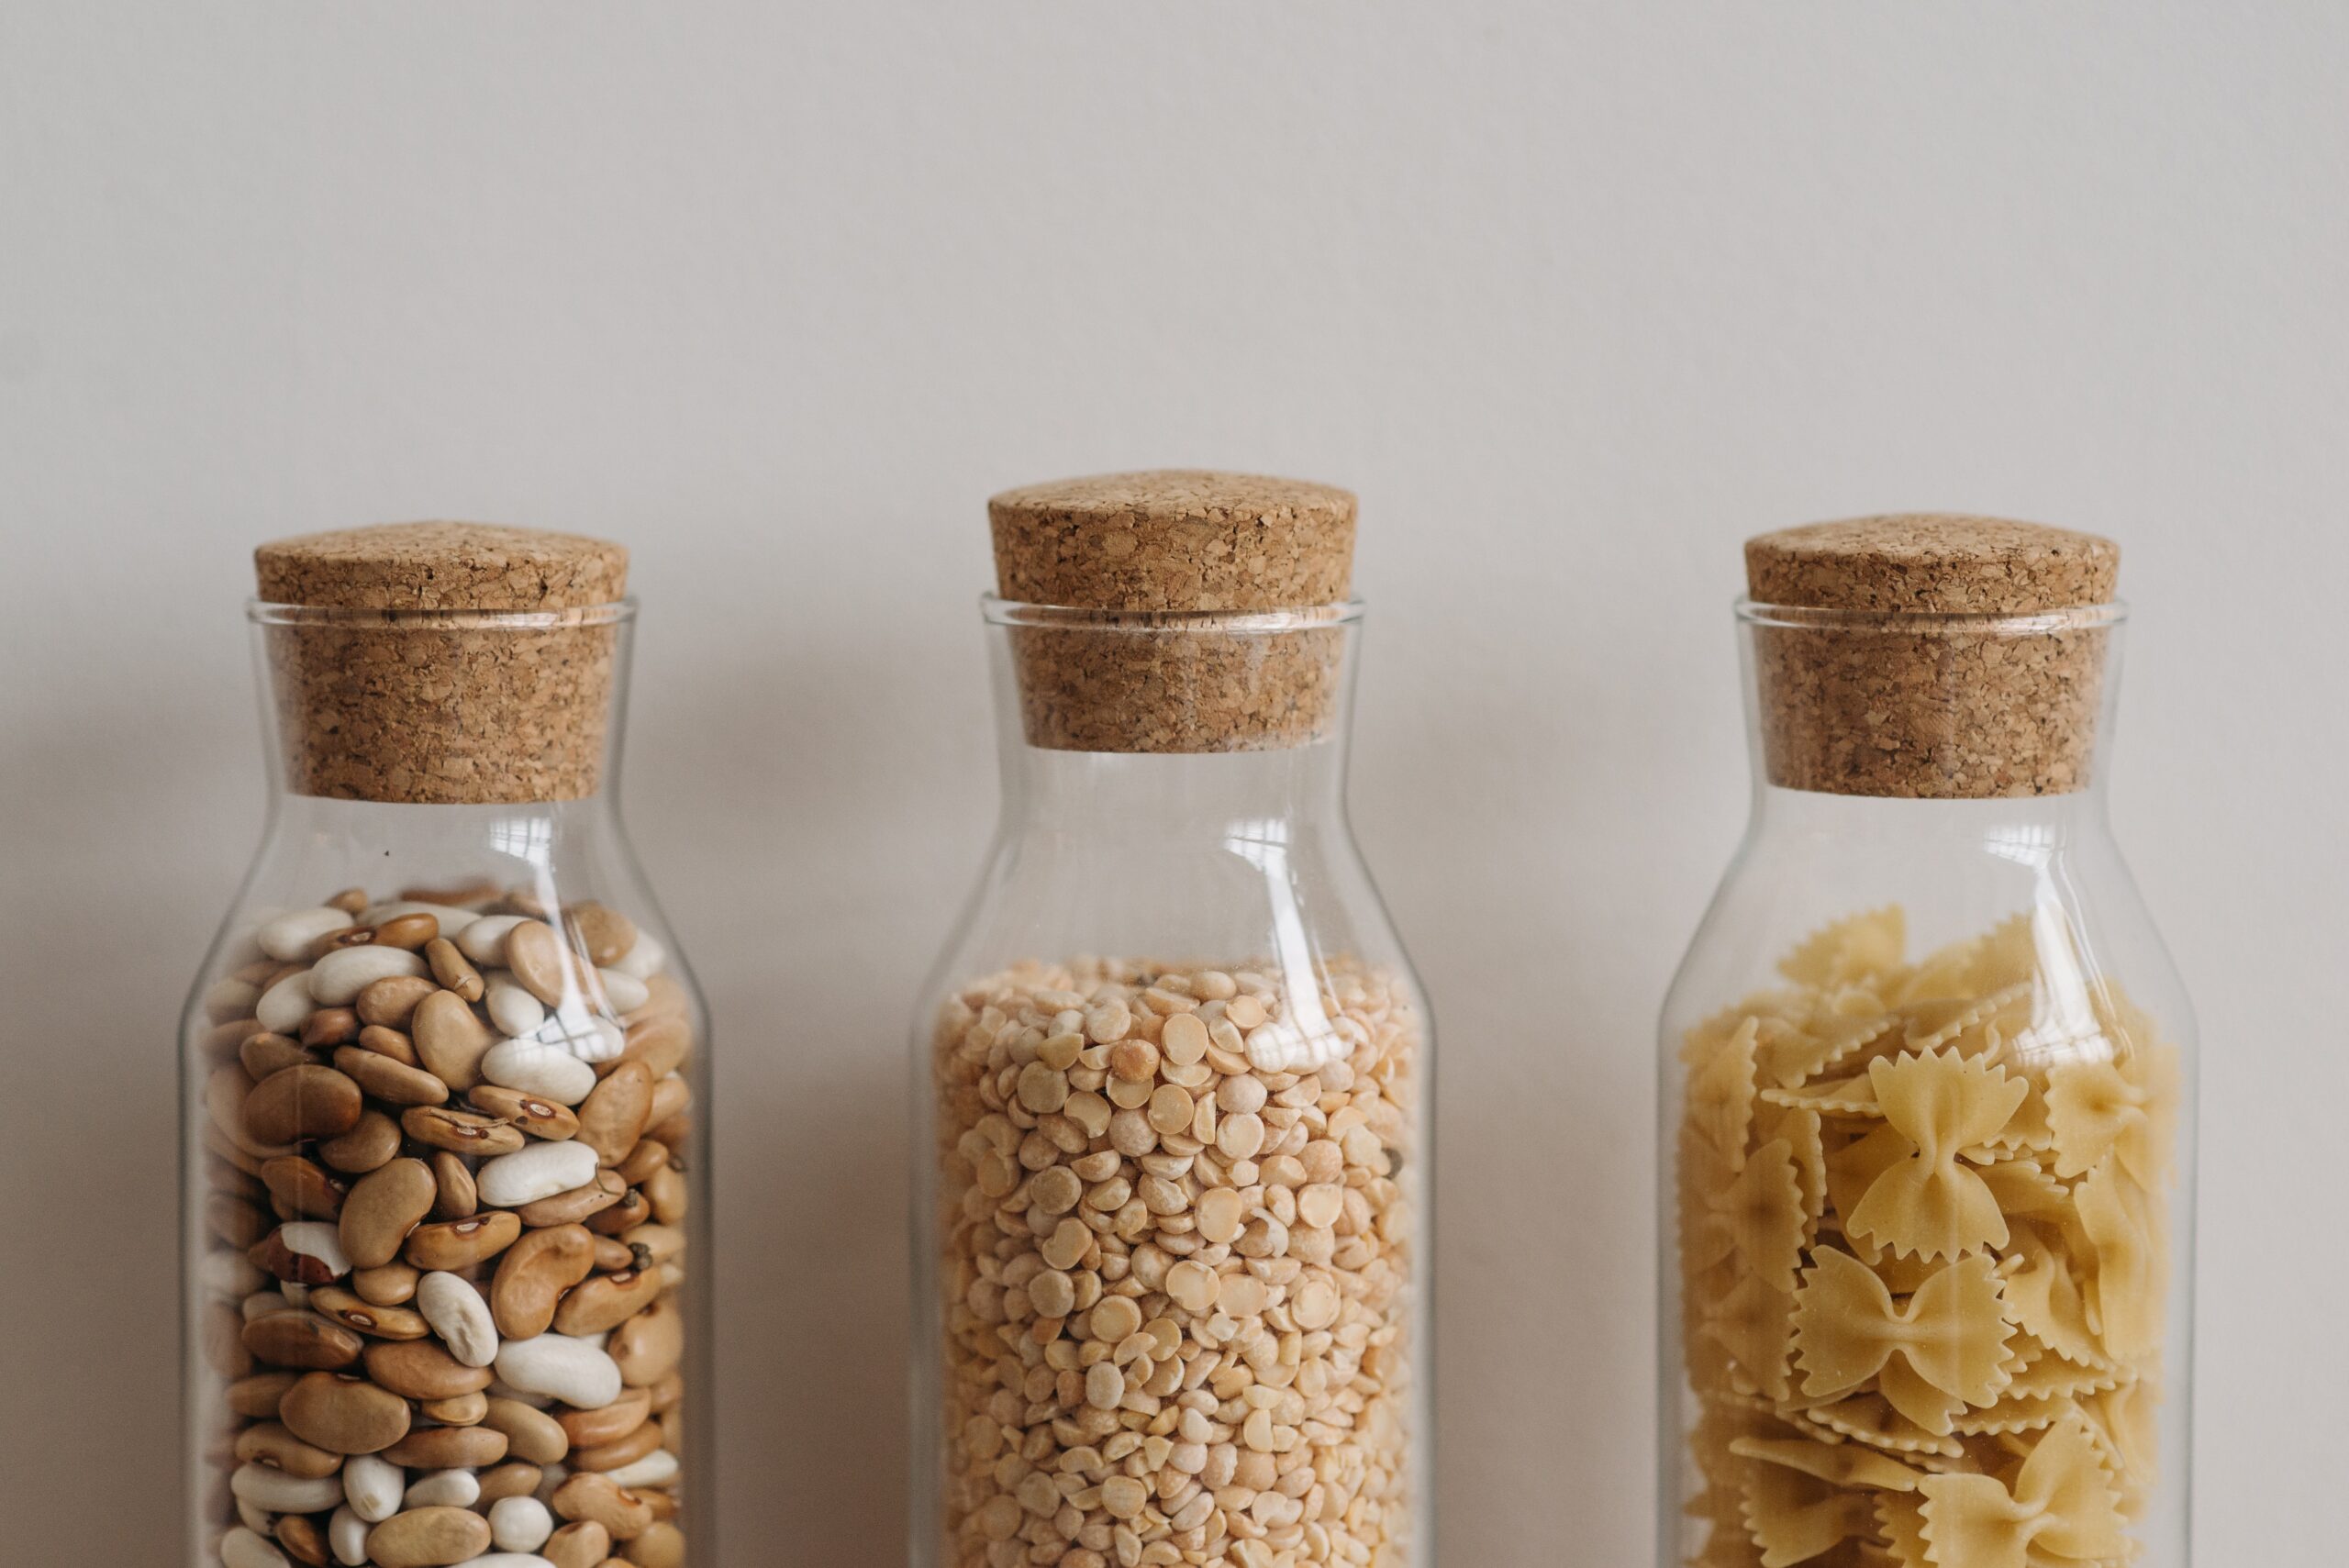 3 containers with dry foods inside, each capped with a cork